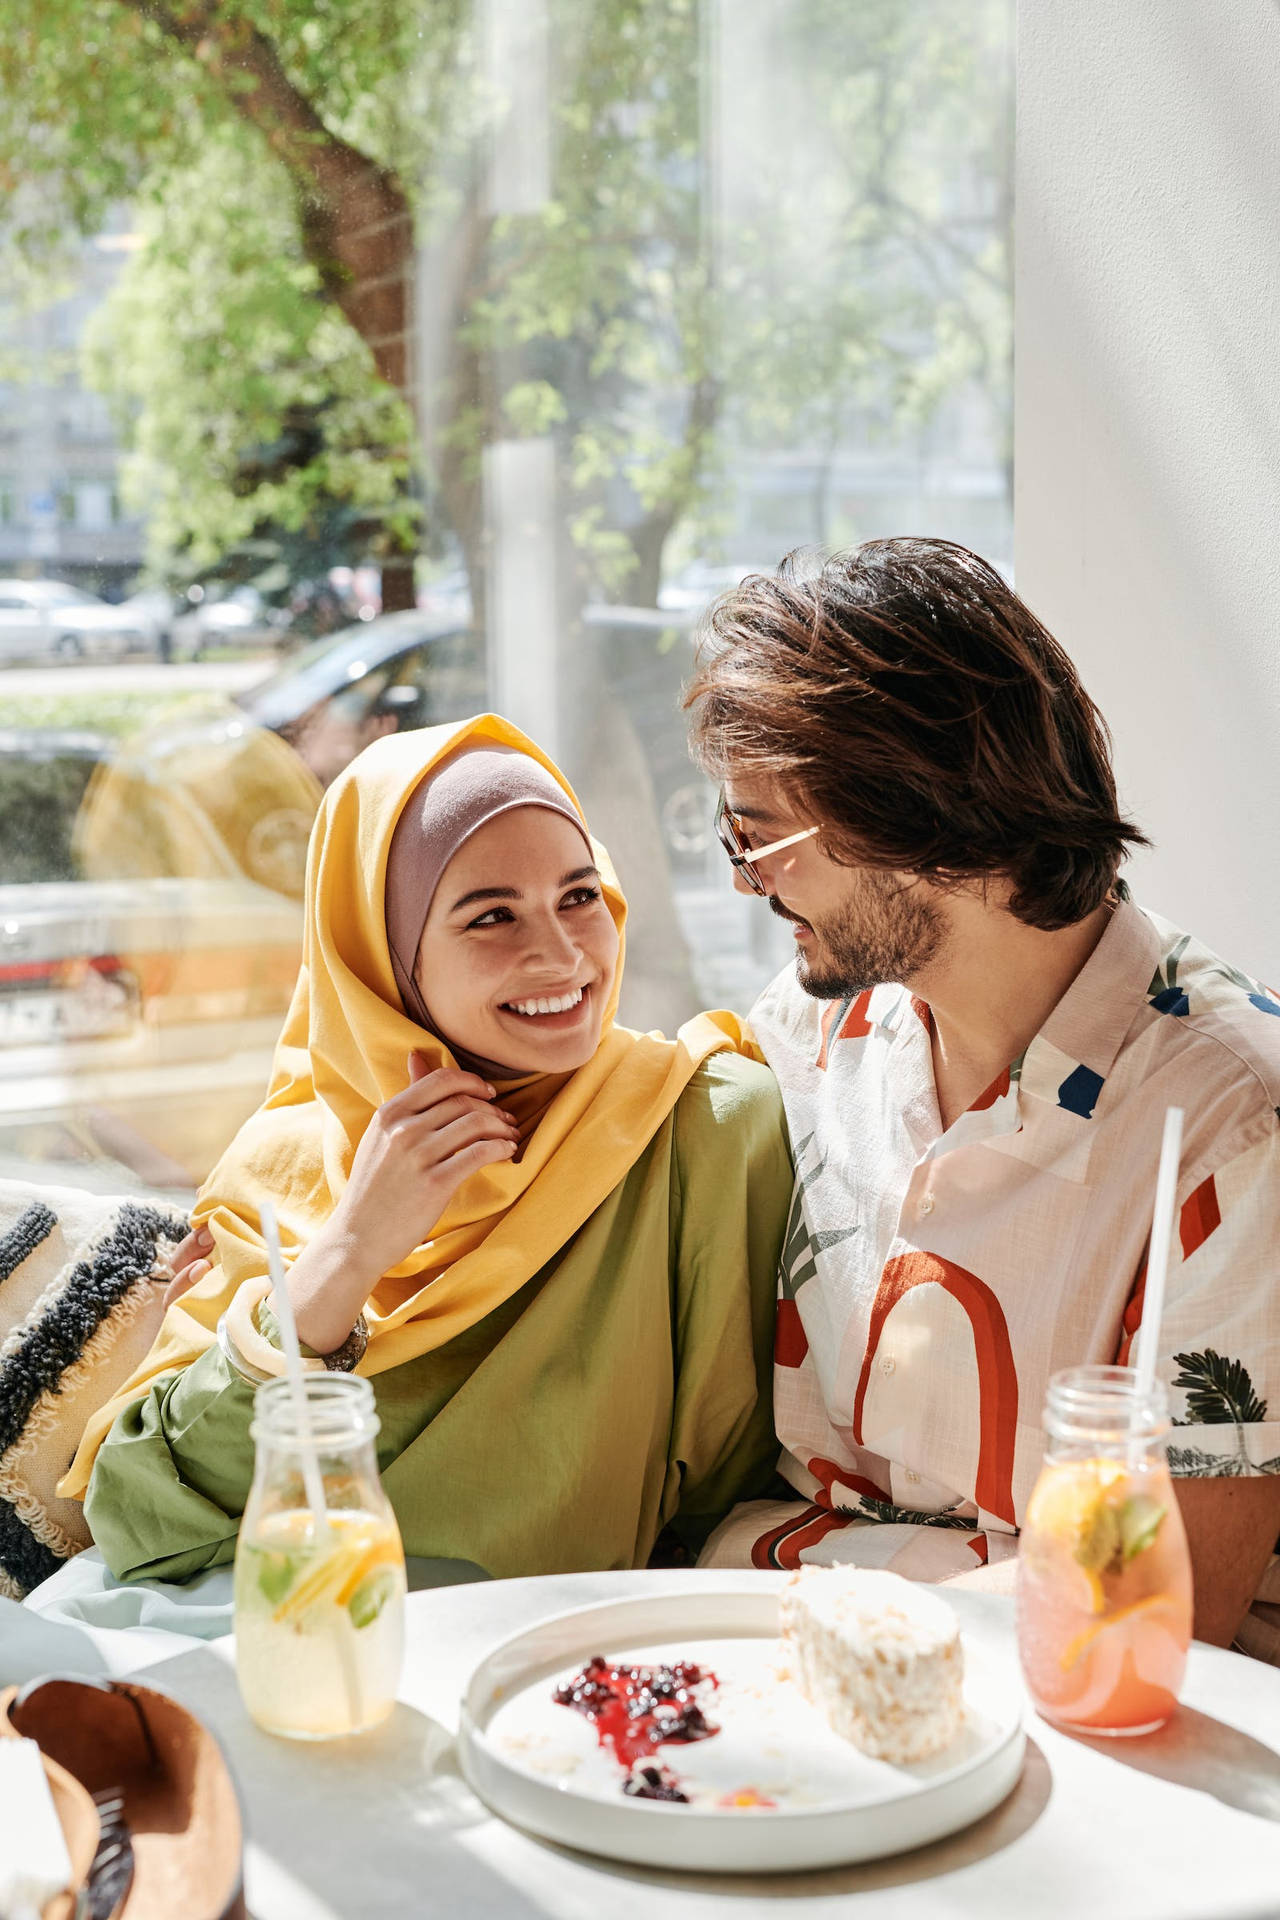 Muslim Couple On A Cafe Date